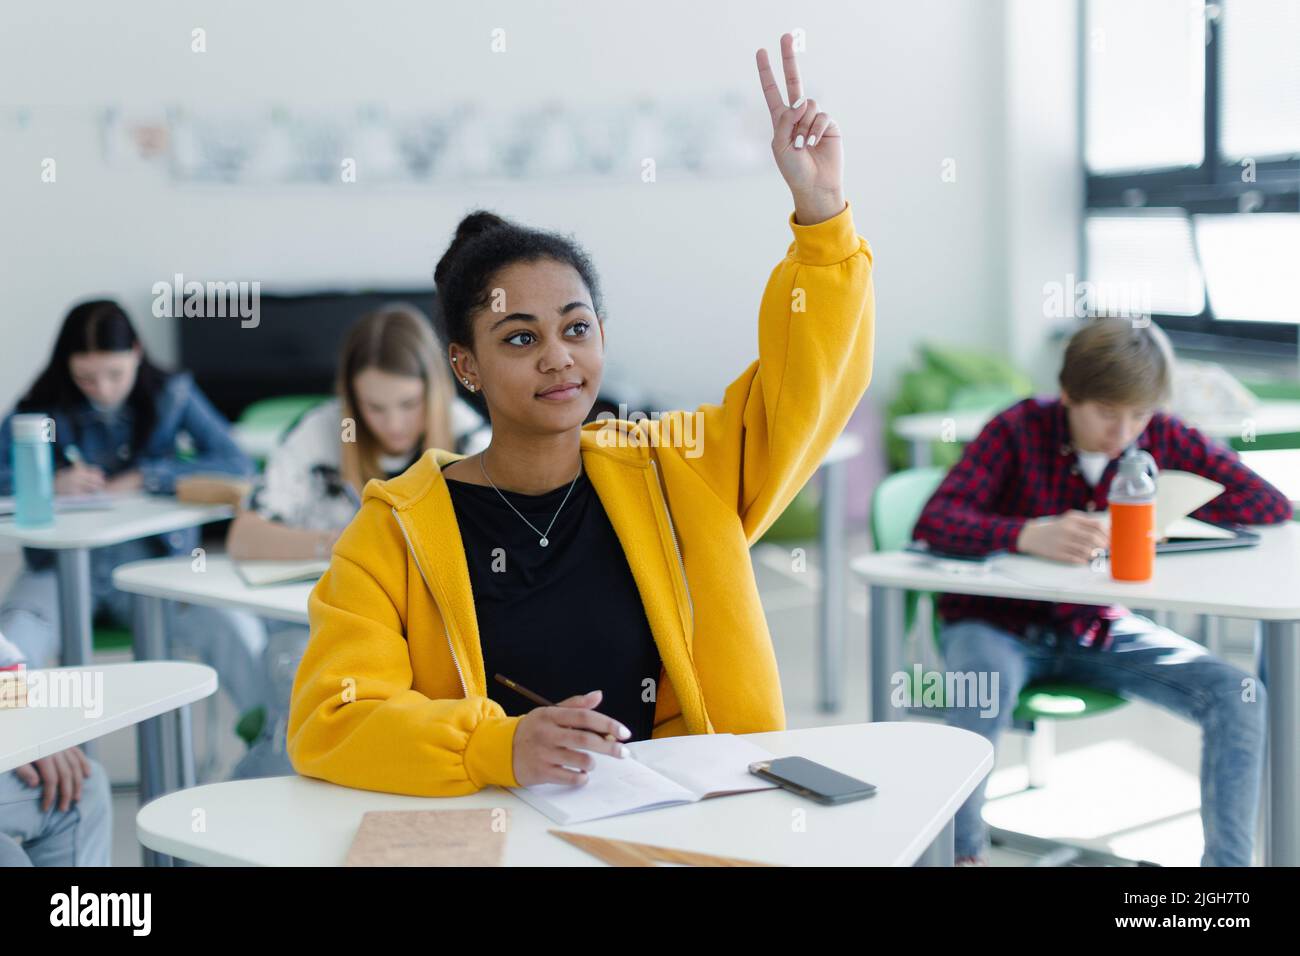 High school students paying attention in class, sitting in their desks and raising hand. Stock Photo